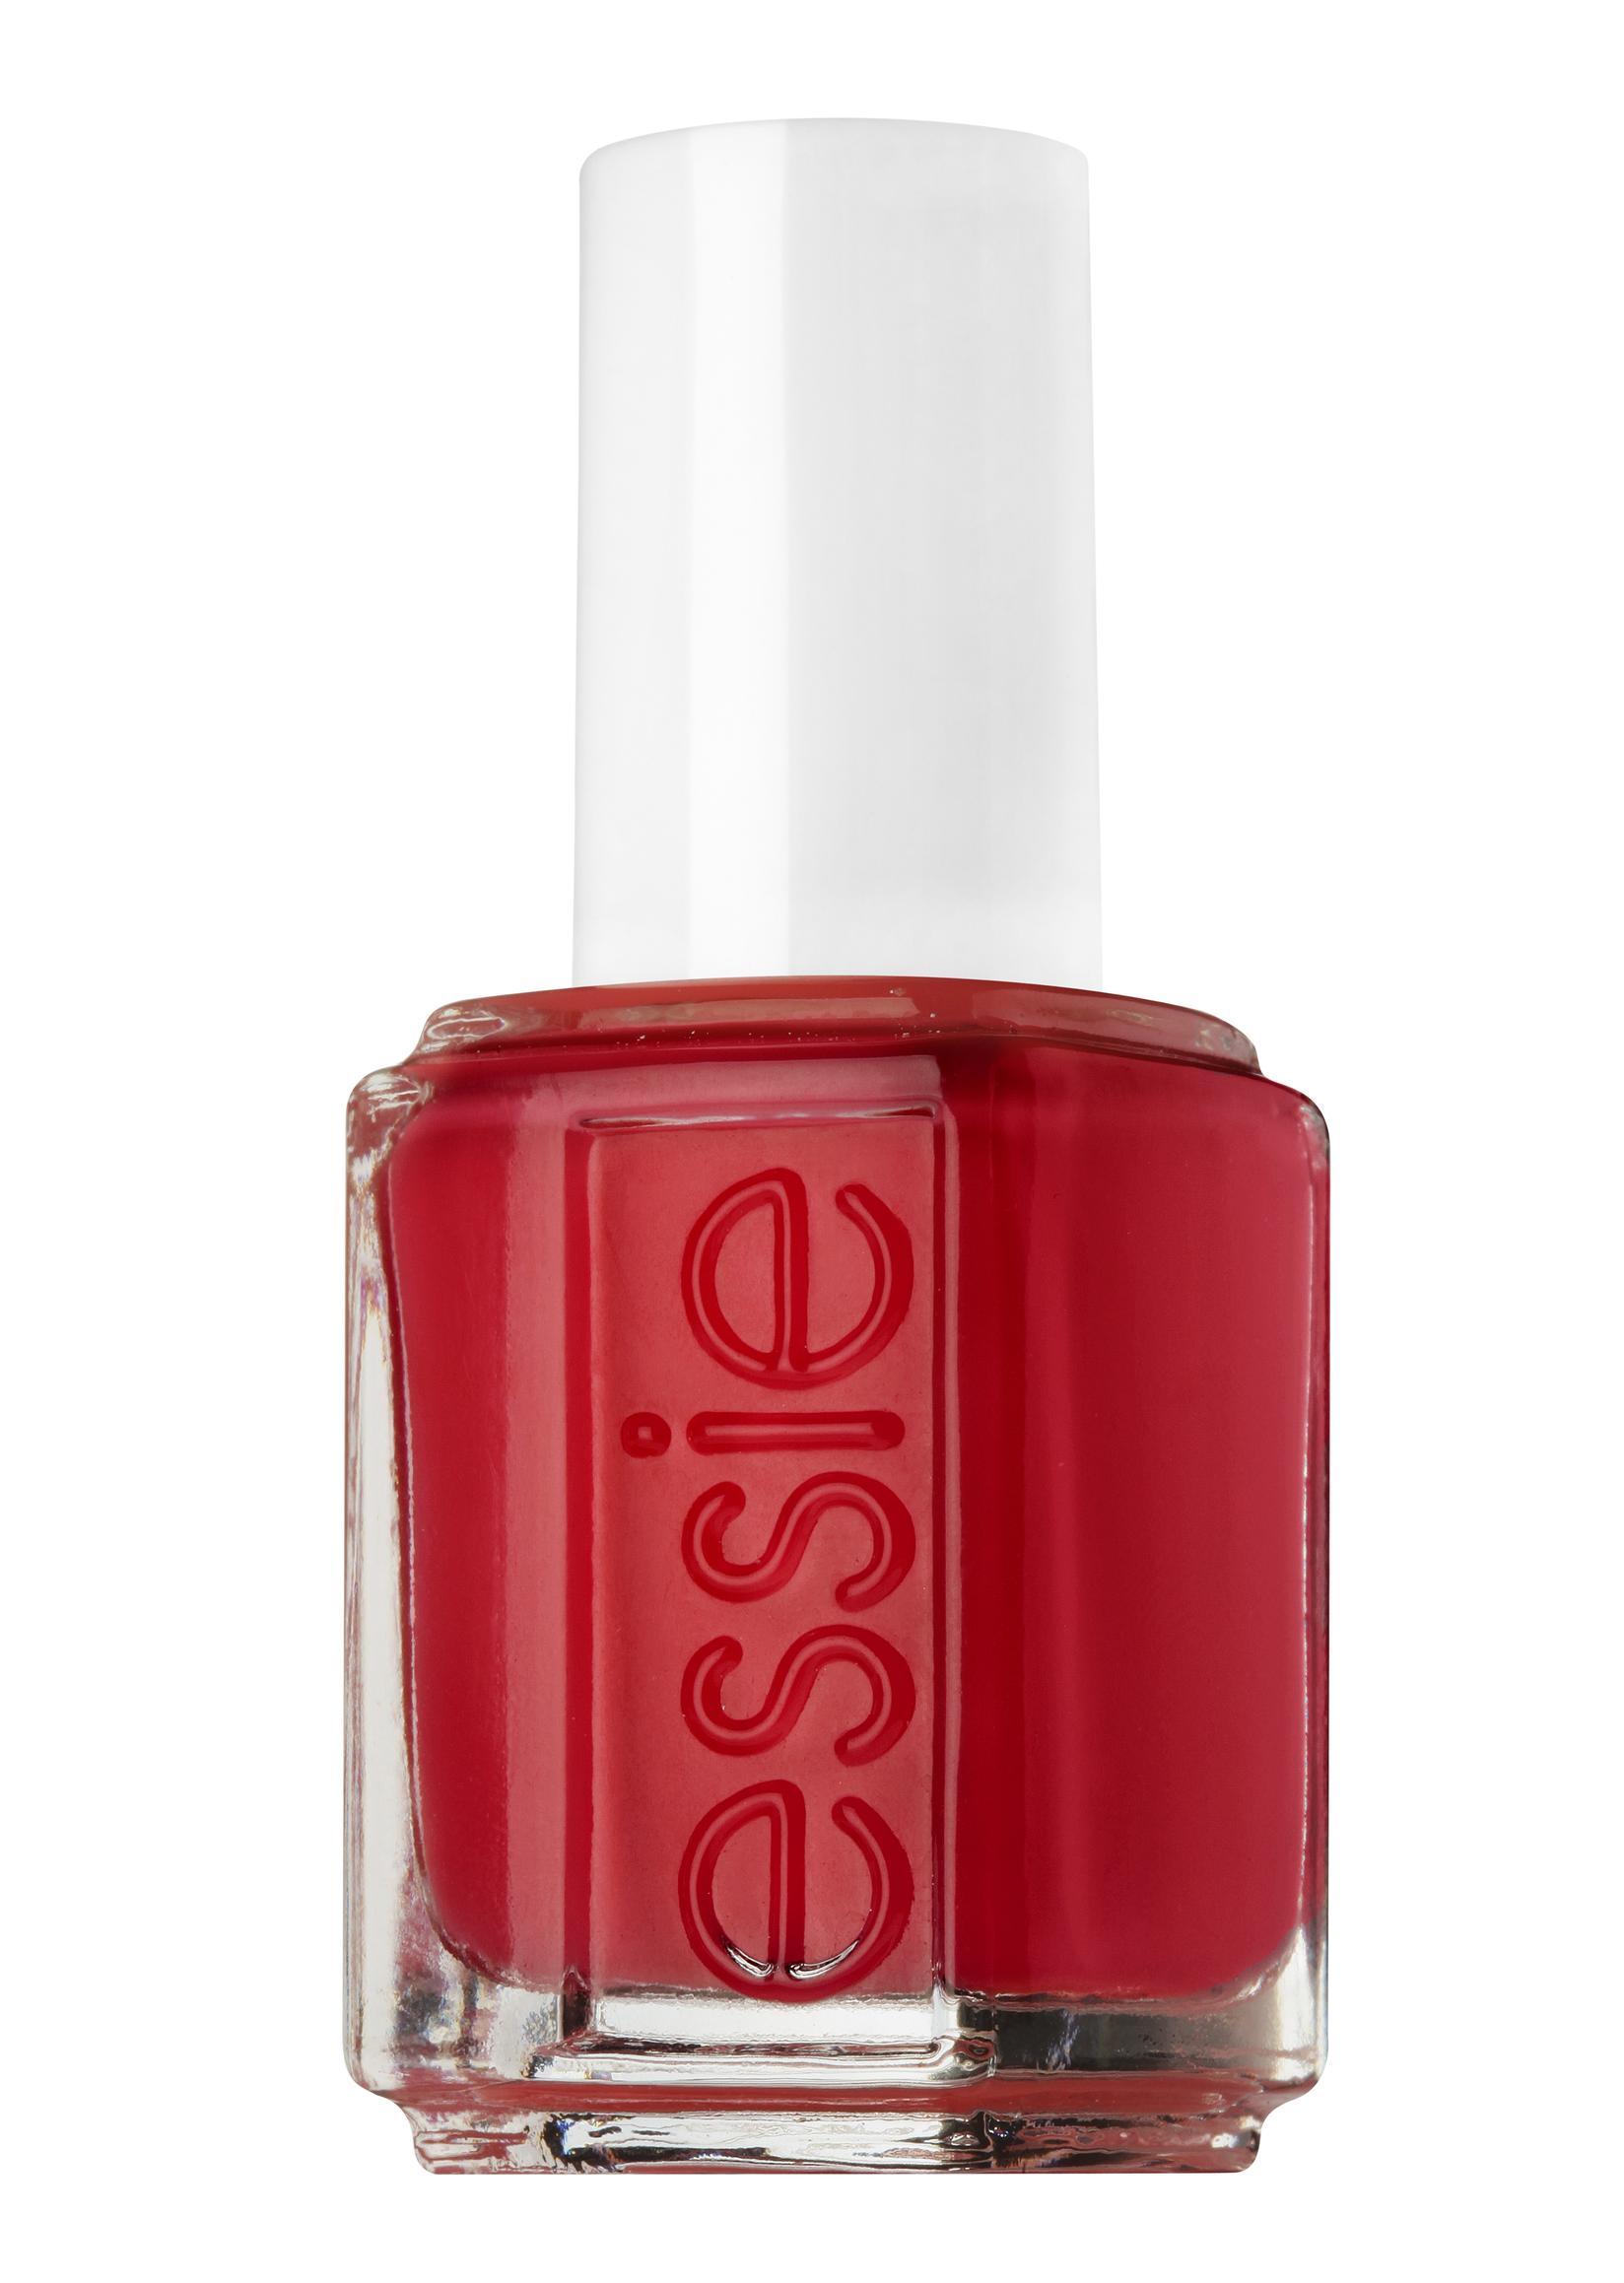 Selected image for ESSIE Lak za nokte 57 Forever Yummy